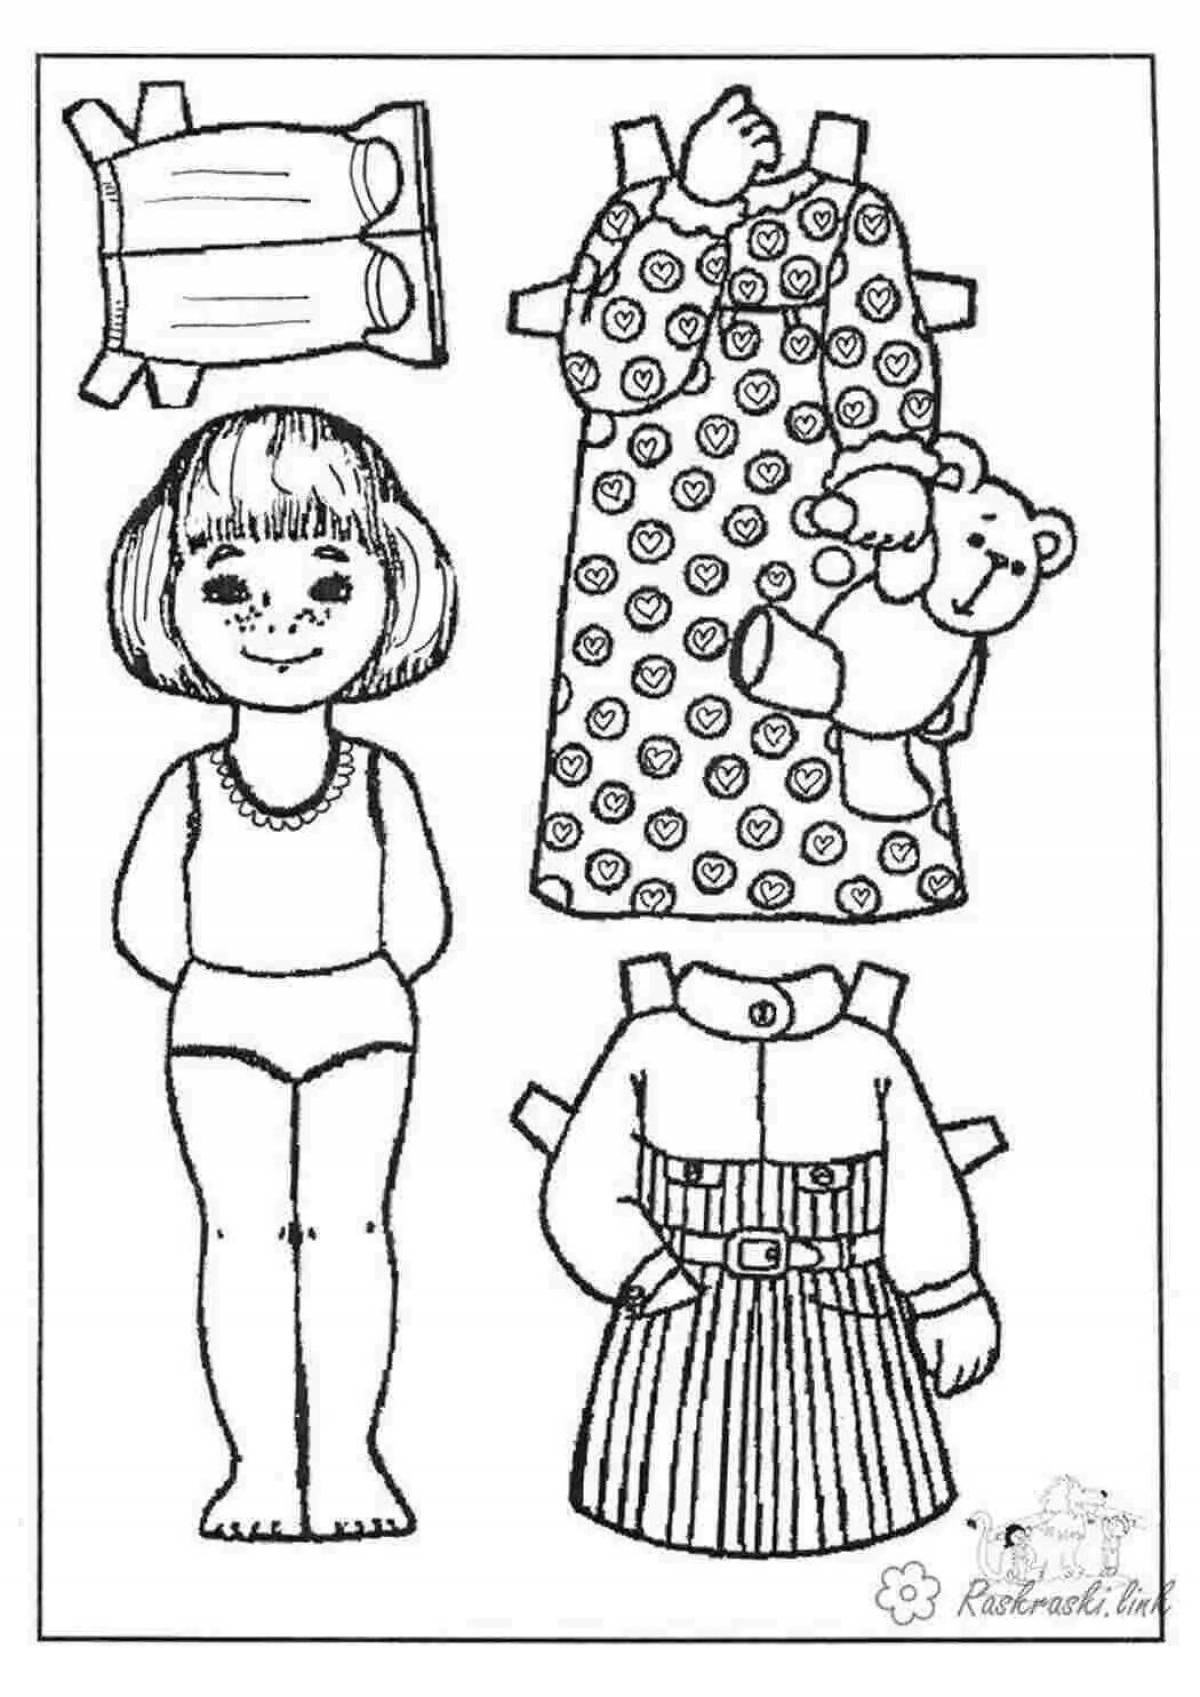 Witty doll Masha coloring